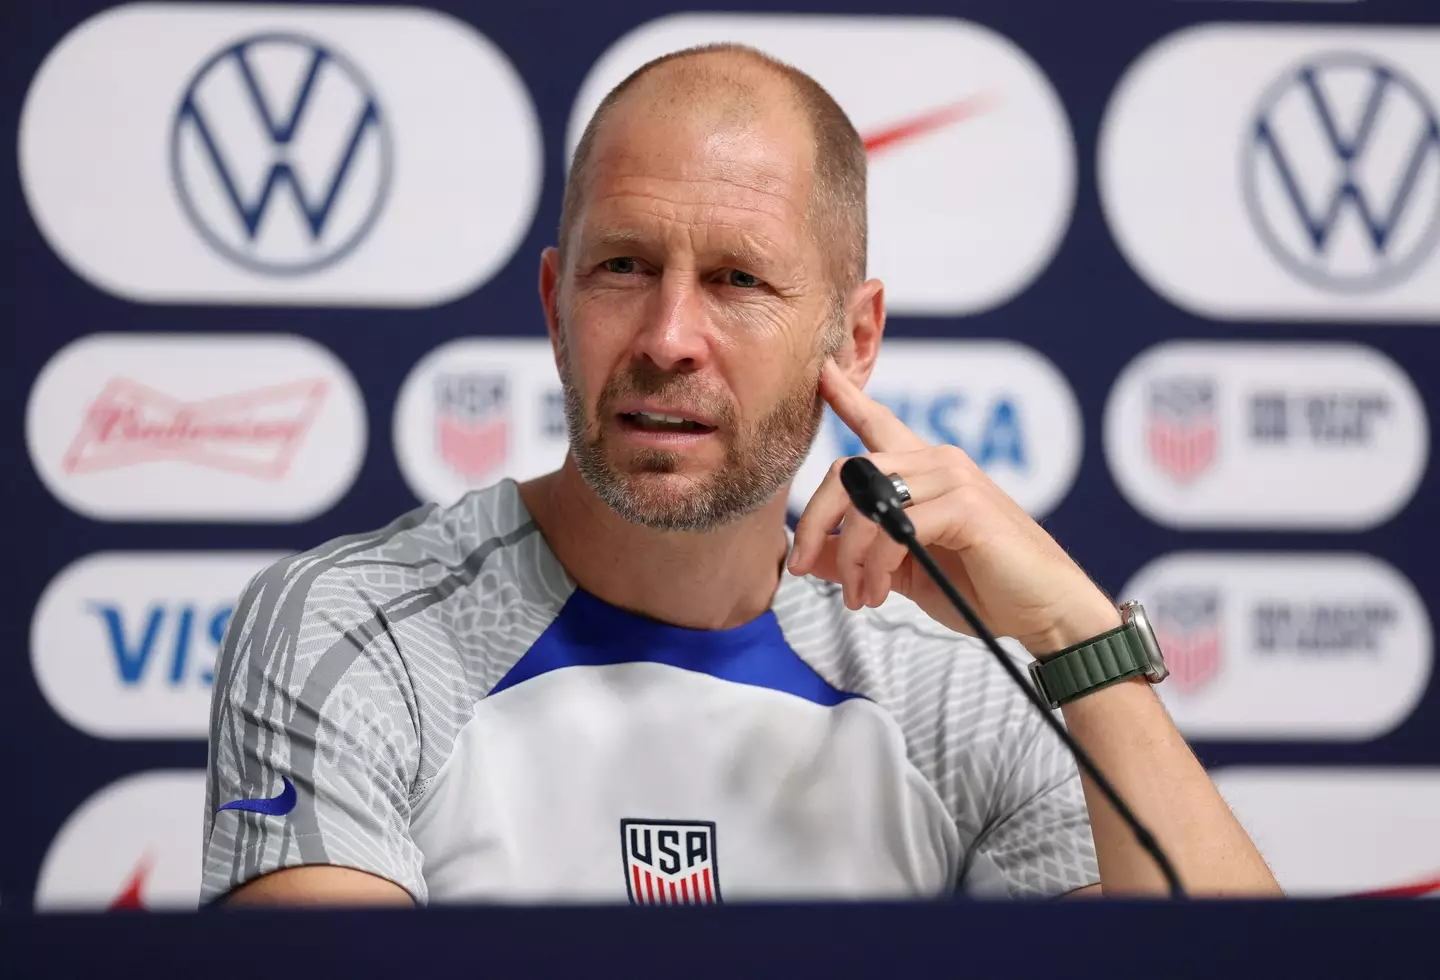 USA manager Gregg Berhalter accidentally alluded to Gio Reyna during his speech at the HOW Institute for Society Summit.